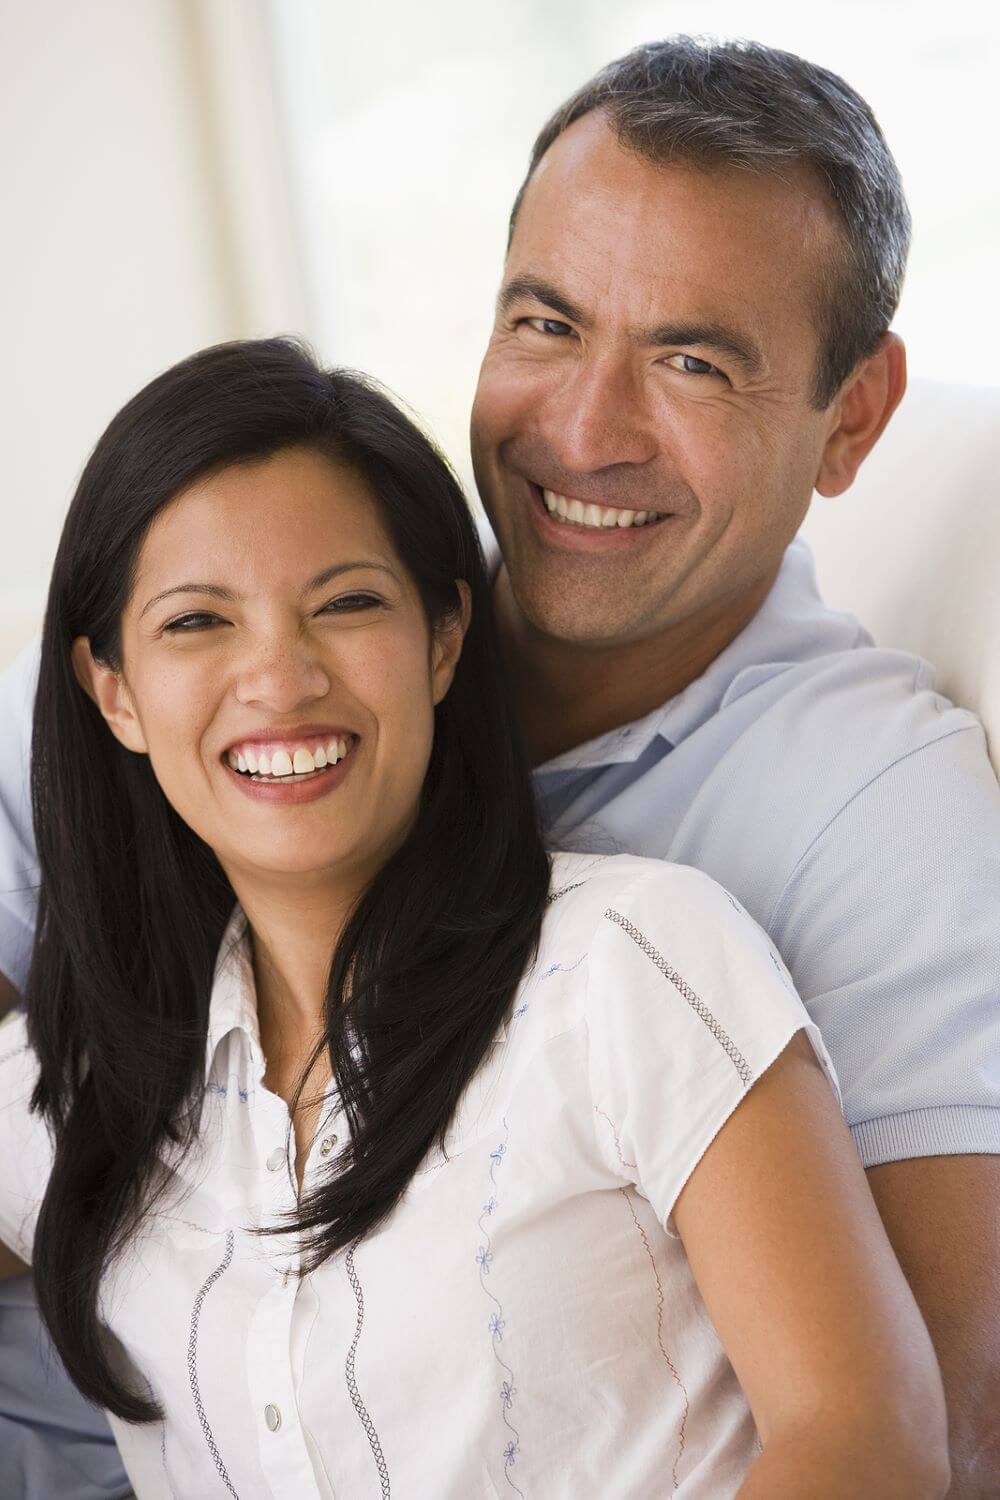 Middle aged couple smiling together. When you’re ready to begin healing and moving forward, contact an eft therapist. Dr. Carol offers marriage counseling and couples therapy in Torrance, CA for those who need support. Call now and begin EFT therapy!